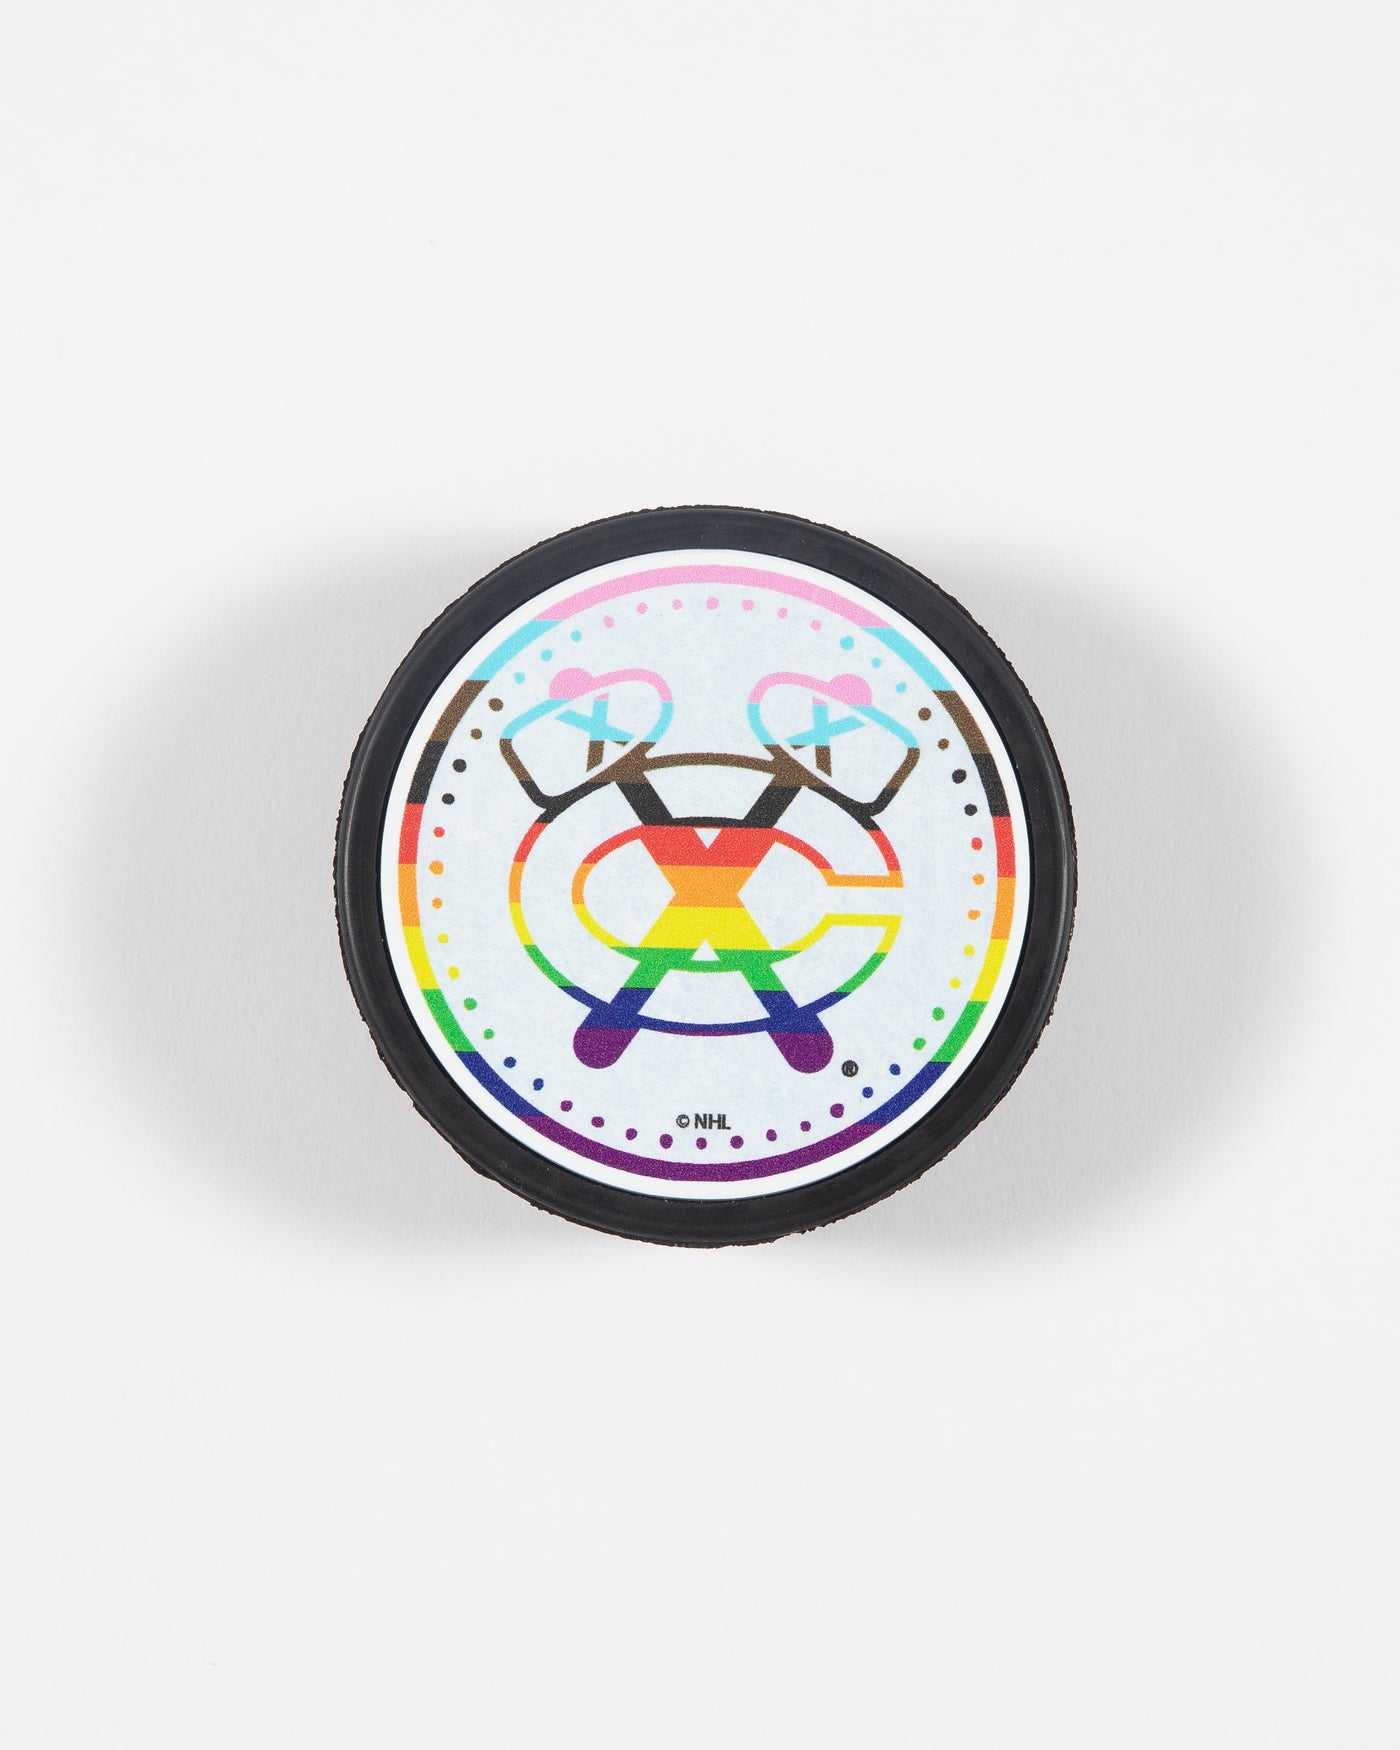 Puck with Chicago Blackhawks Secondary logo in Pride colorway - front lay flat